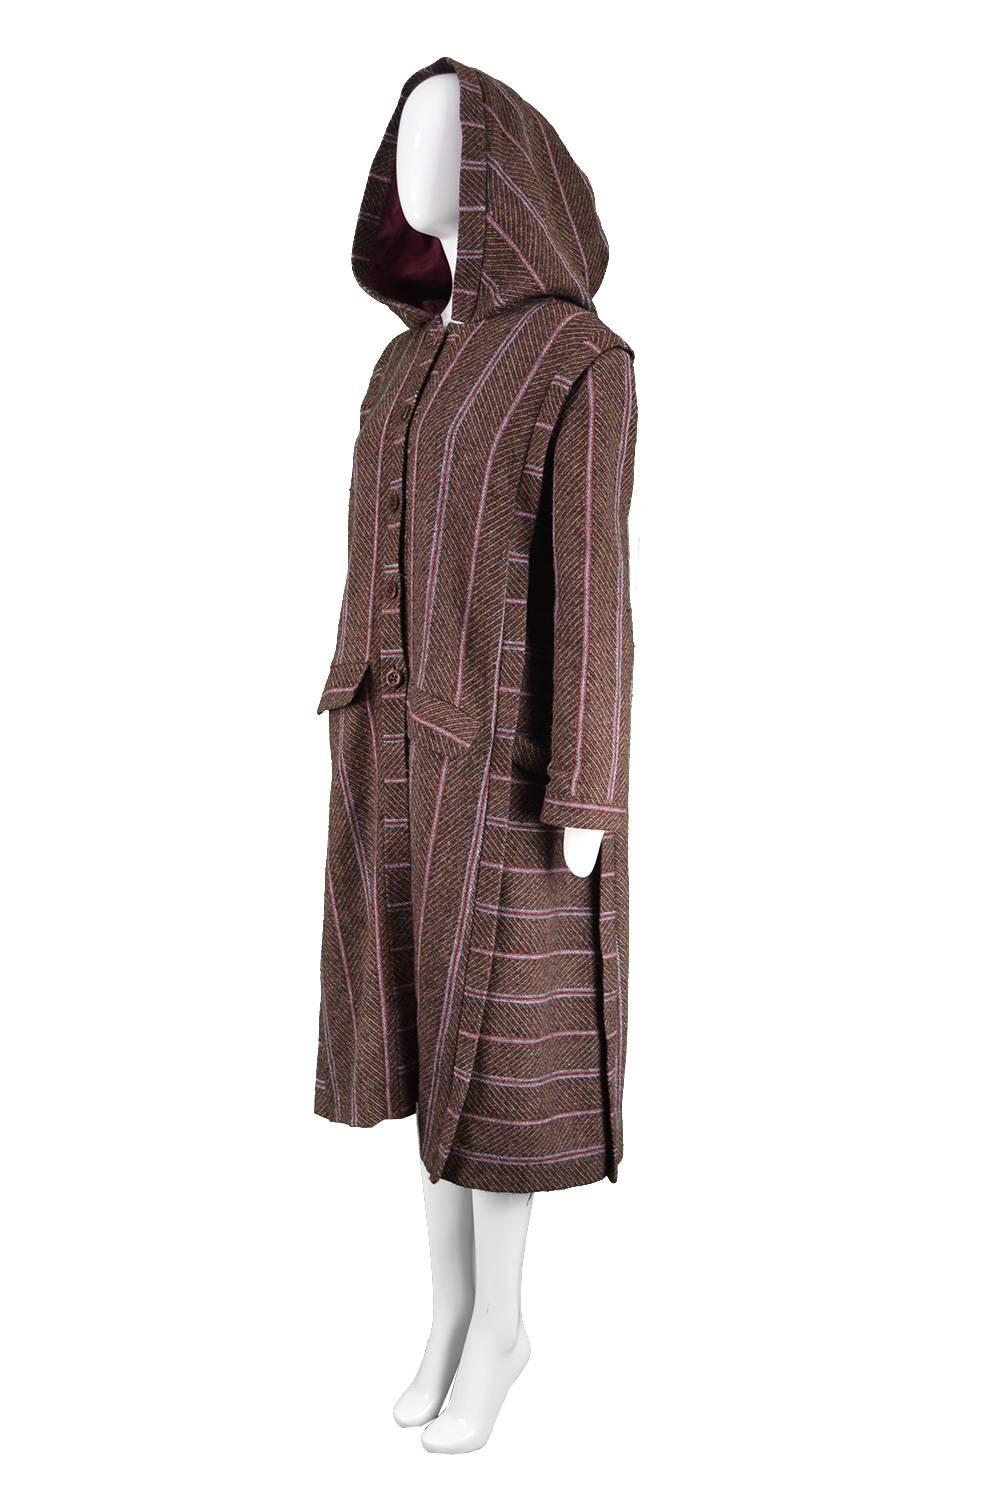 Women's Bill Gibb Dramatic Brown Wool Striped Vintage Coat with Oversized Hood, 1970s For Sale